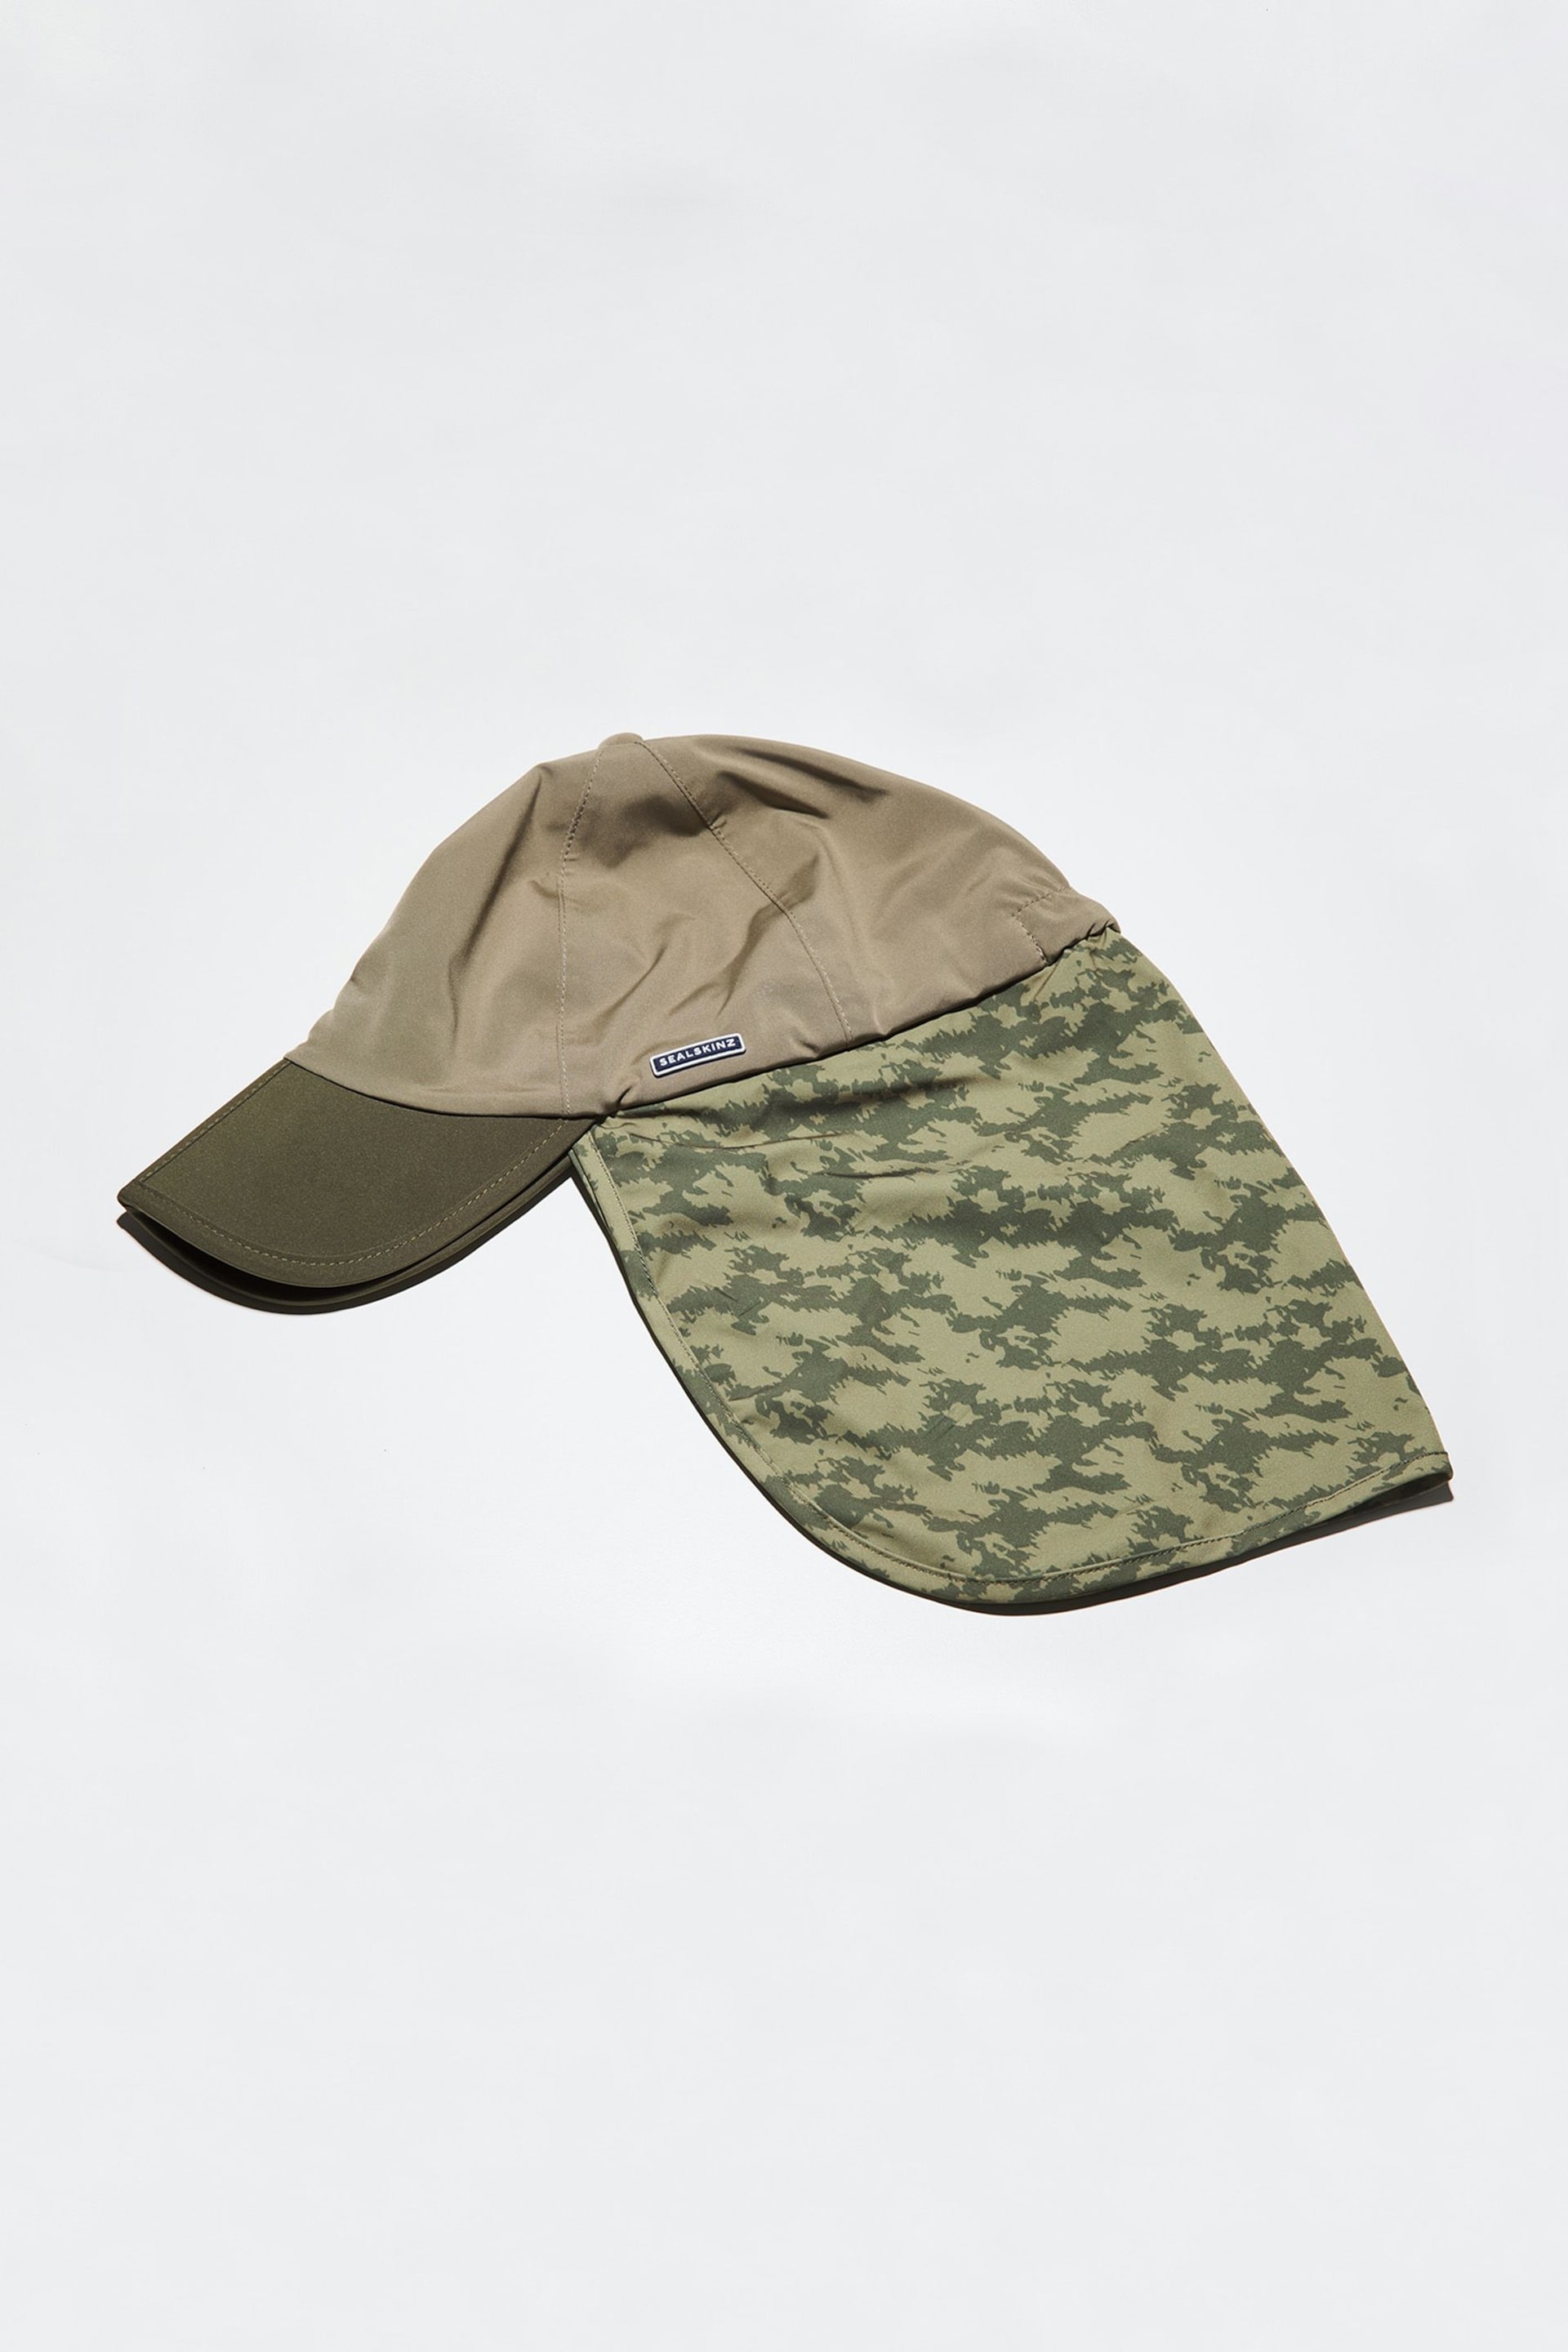 Sealskinz Outwell Waterproof Foldable Peak Cap With Neck Protector - Image 3 of 5